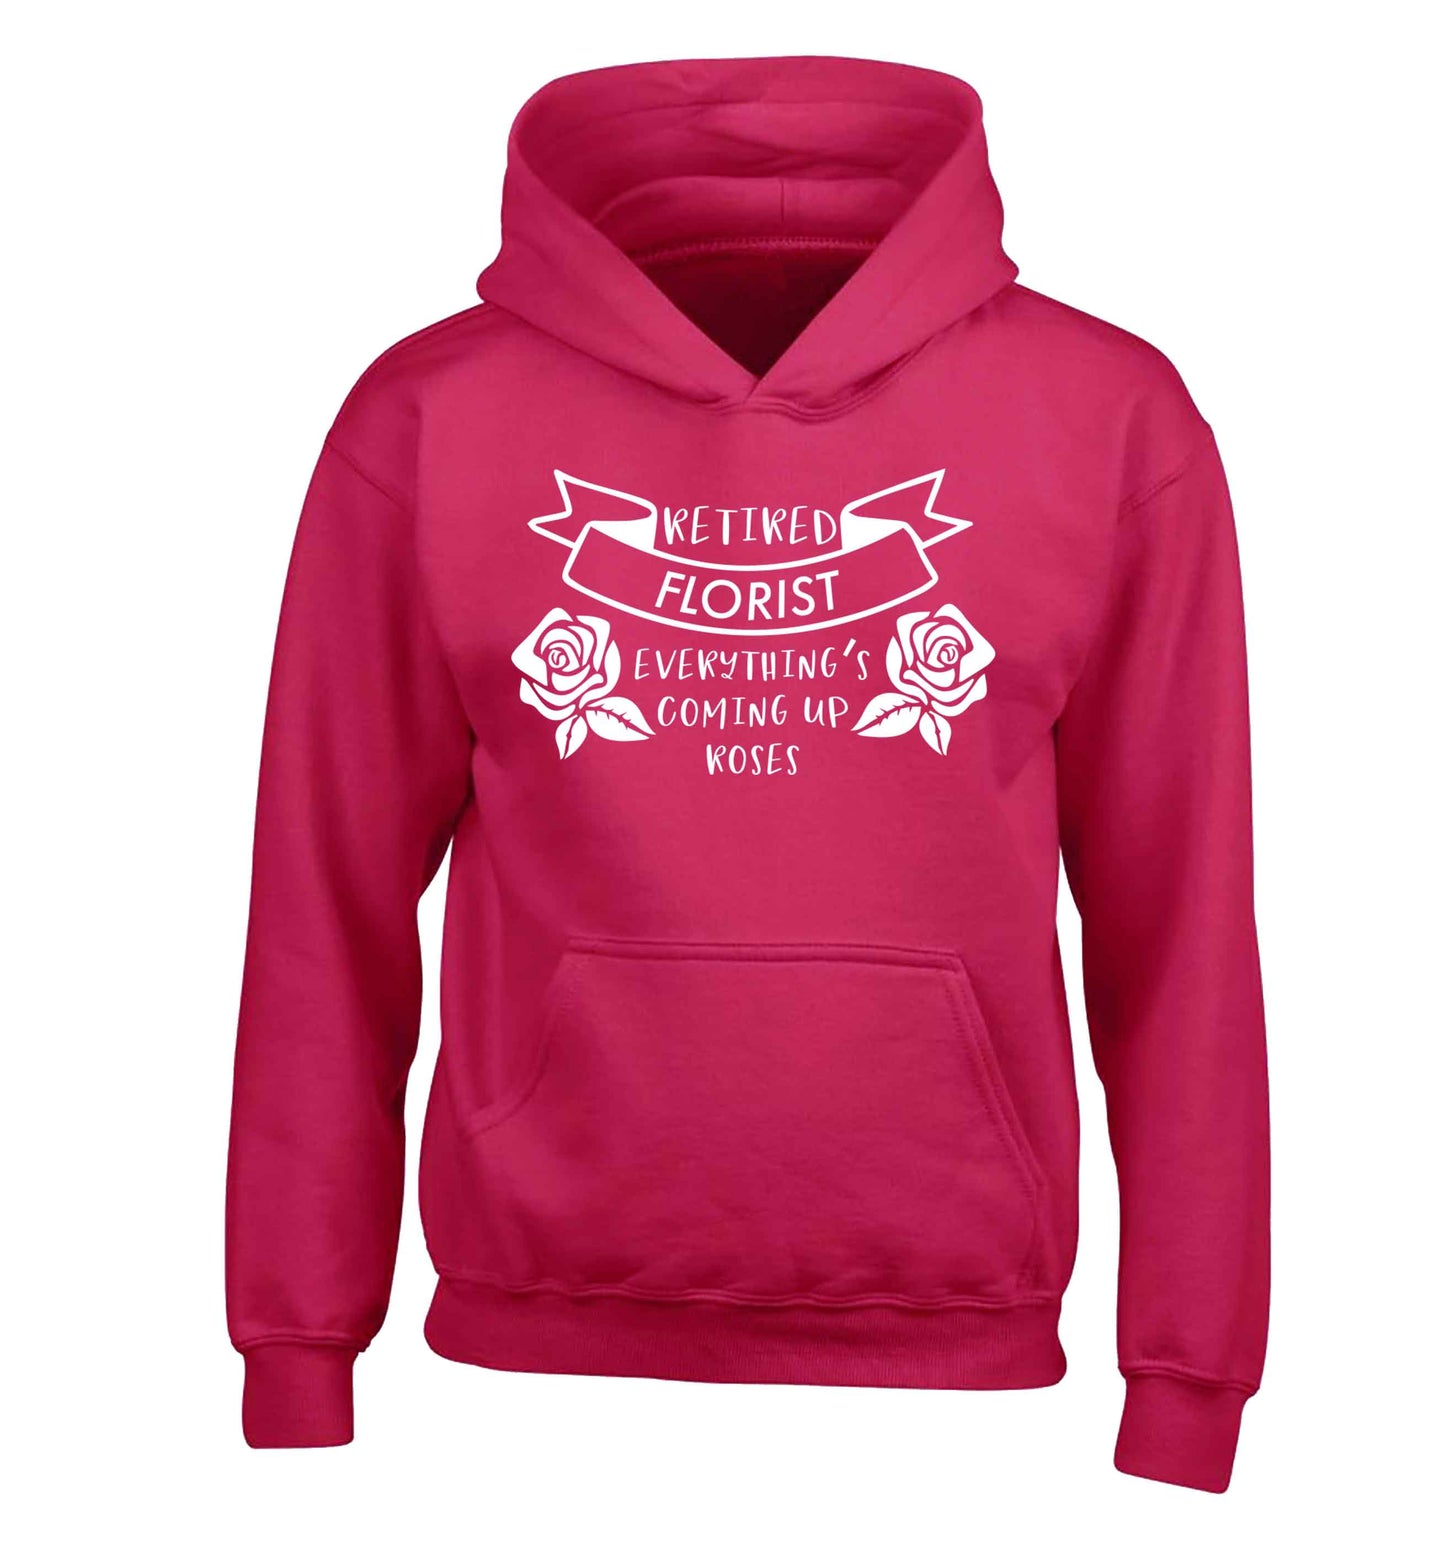 Retired florist everything's coming up roses children's pink hoodie 12-13 Years